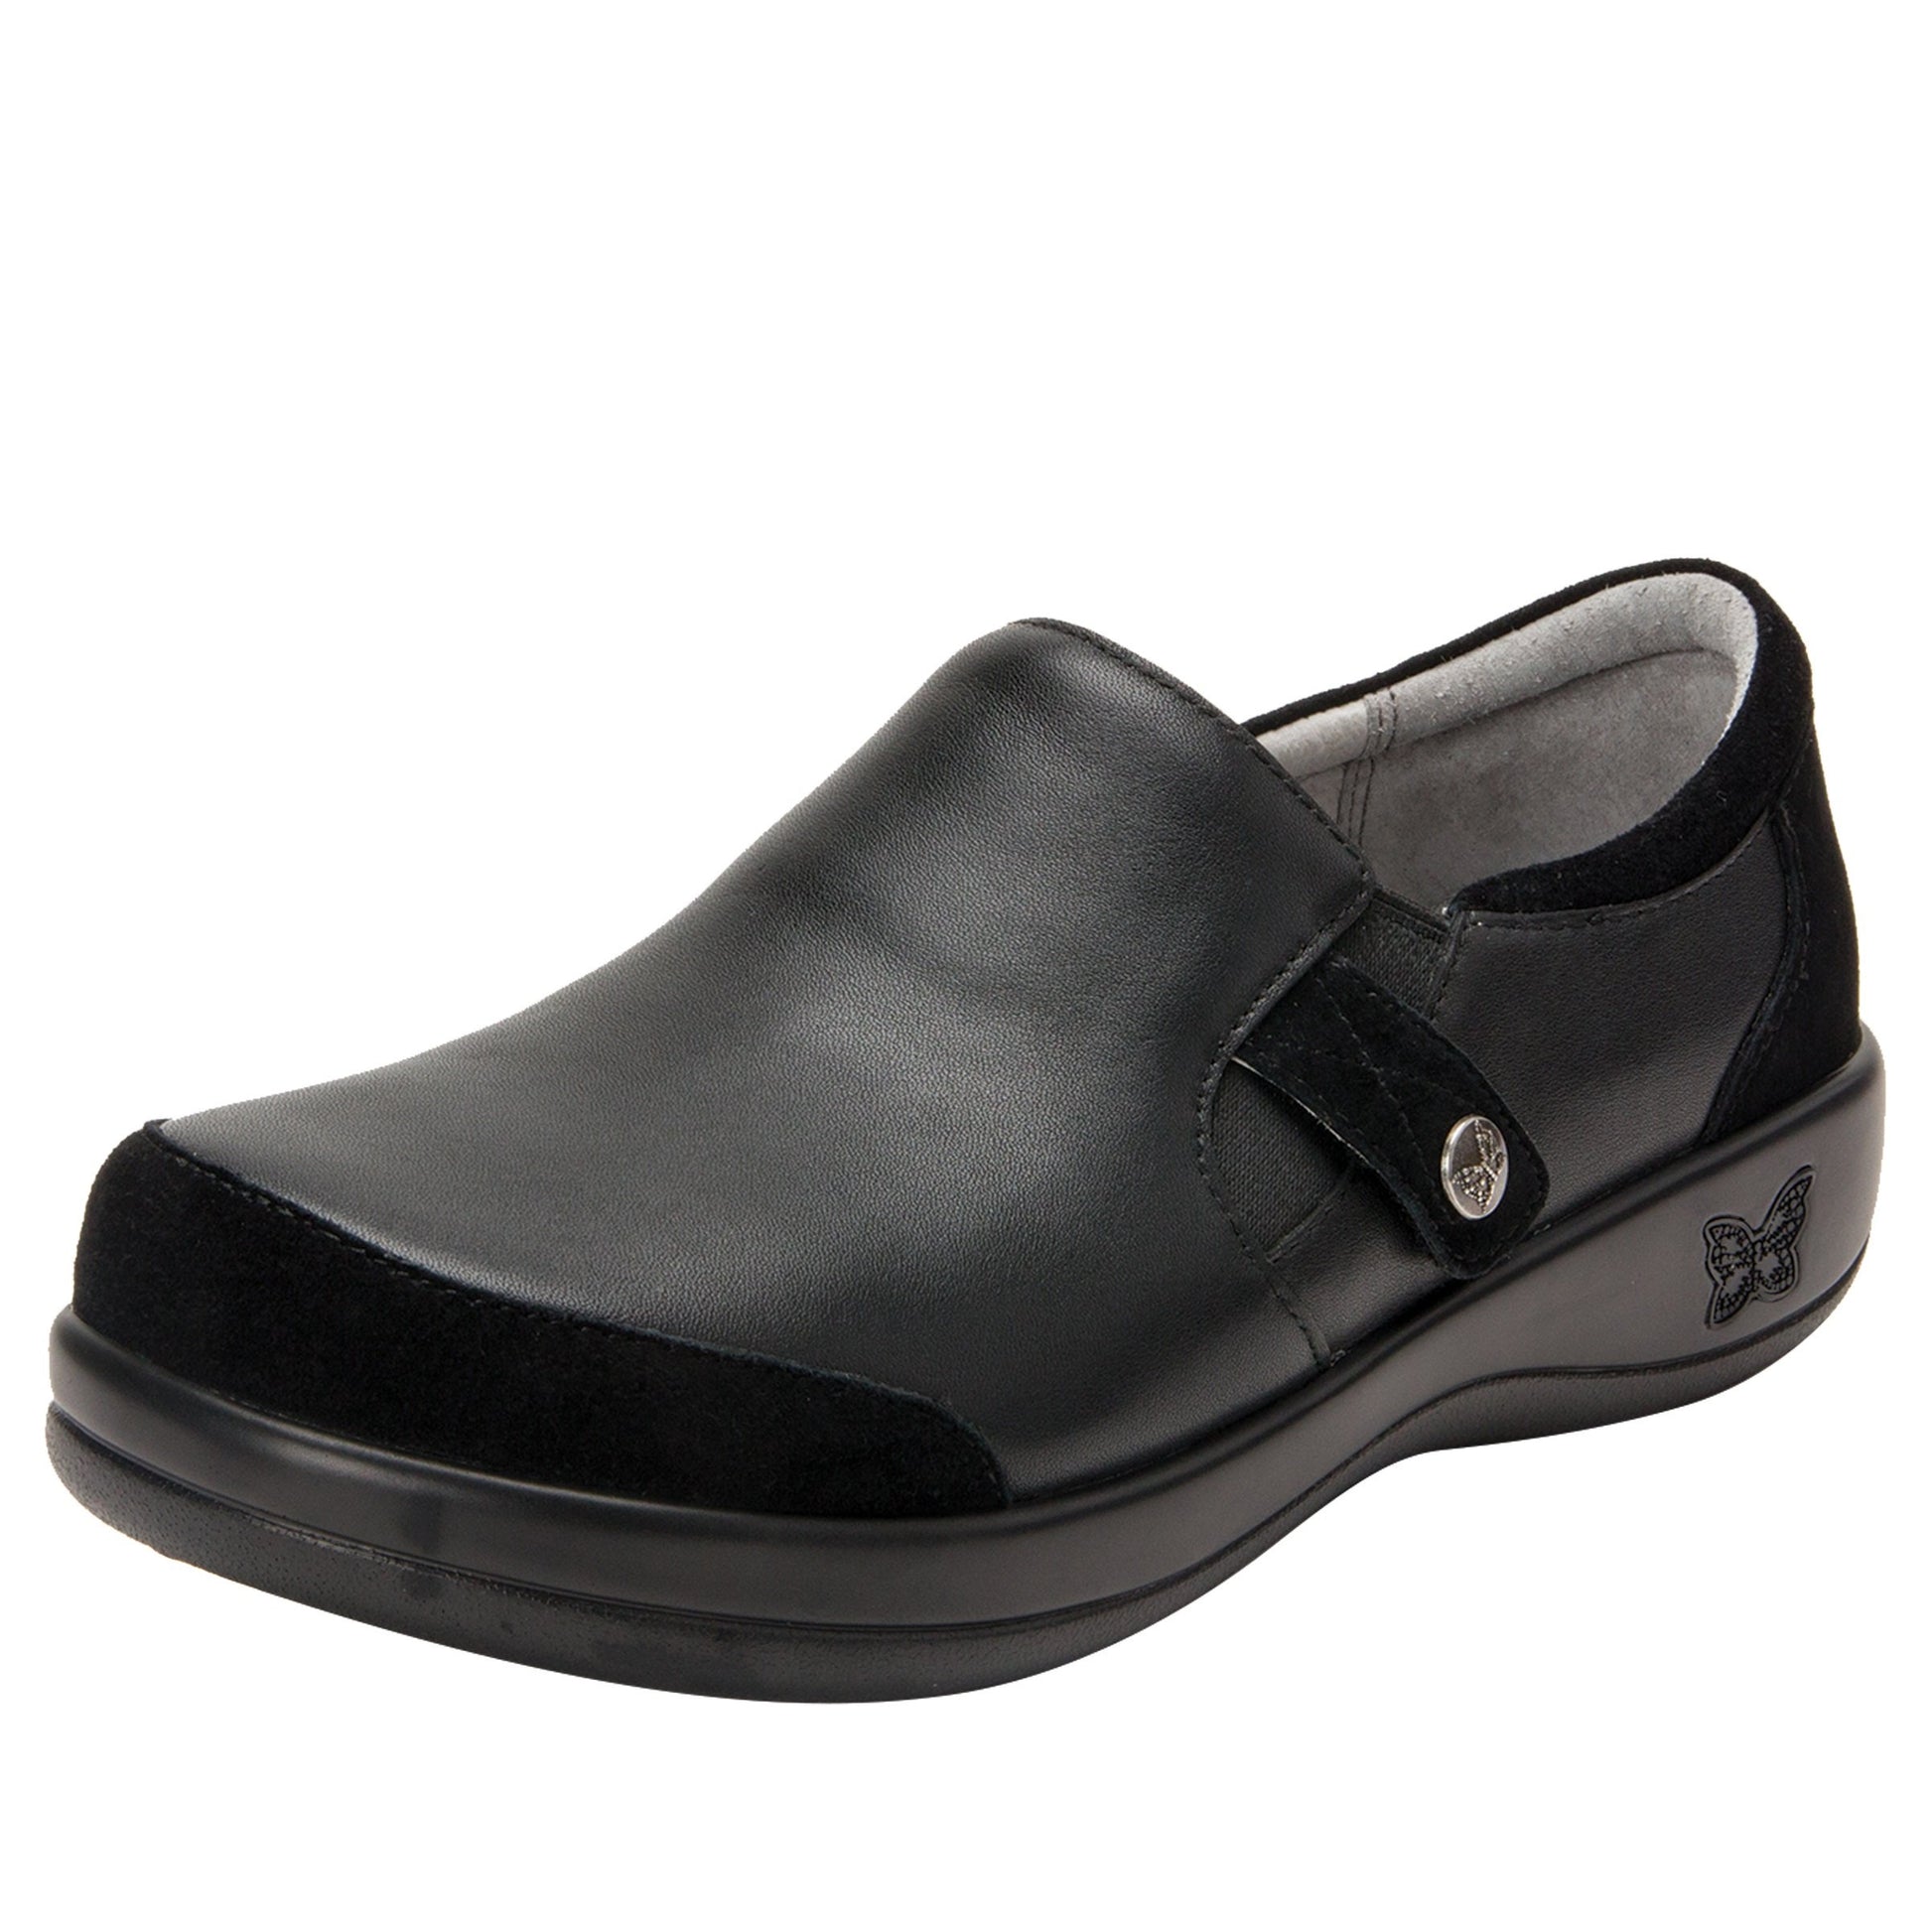 Alegria Sale Shoe Size 36 Paityn in Black at Parker's Clothing and Shoes.